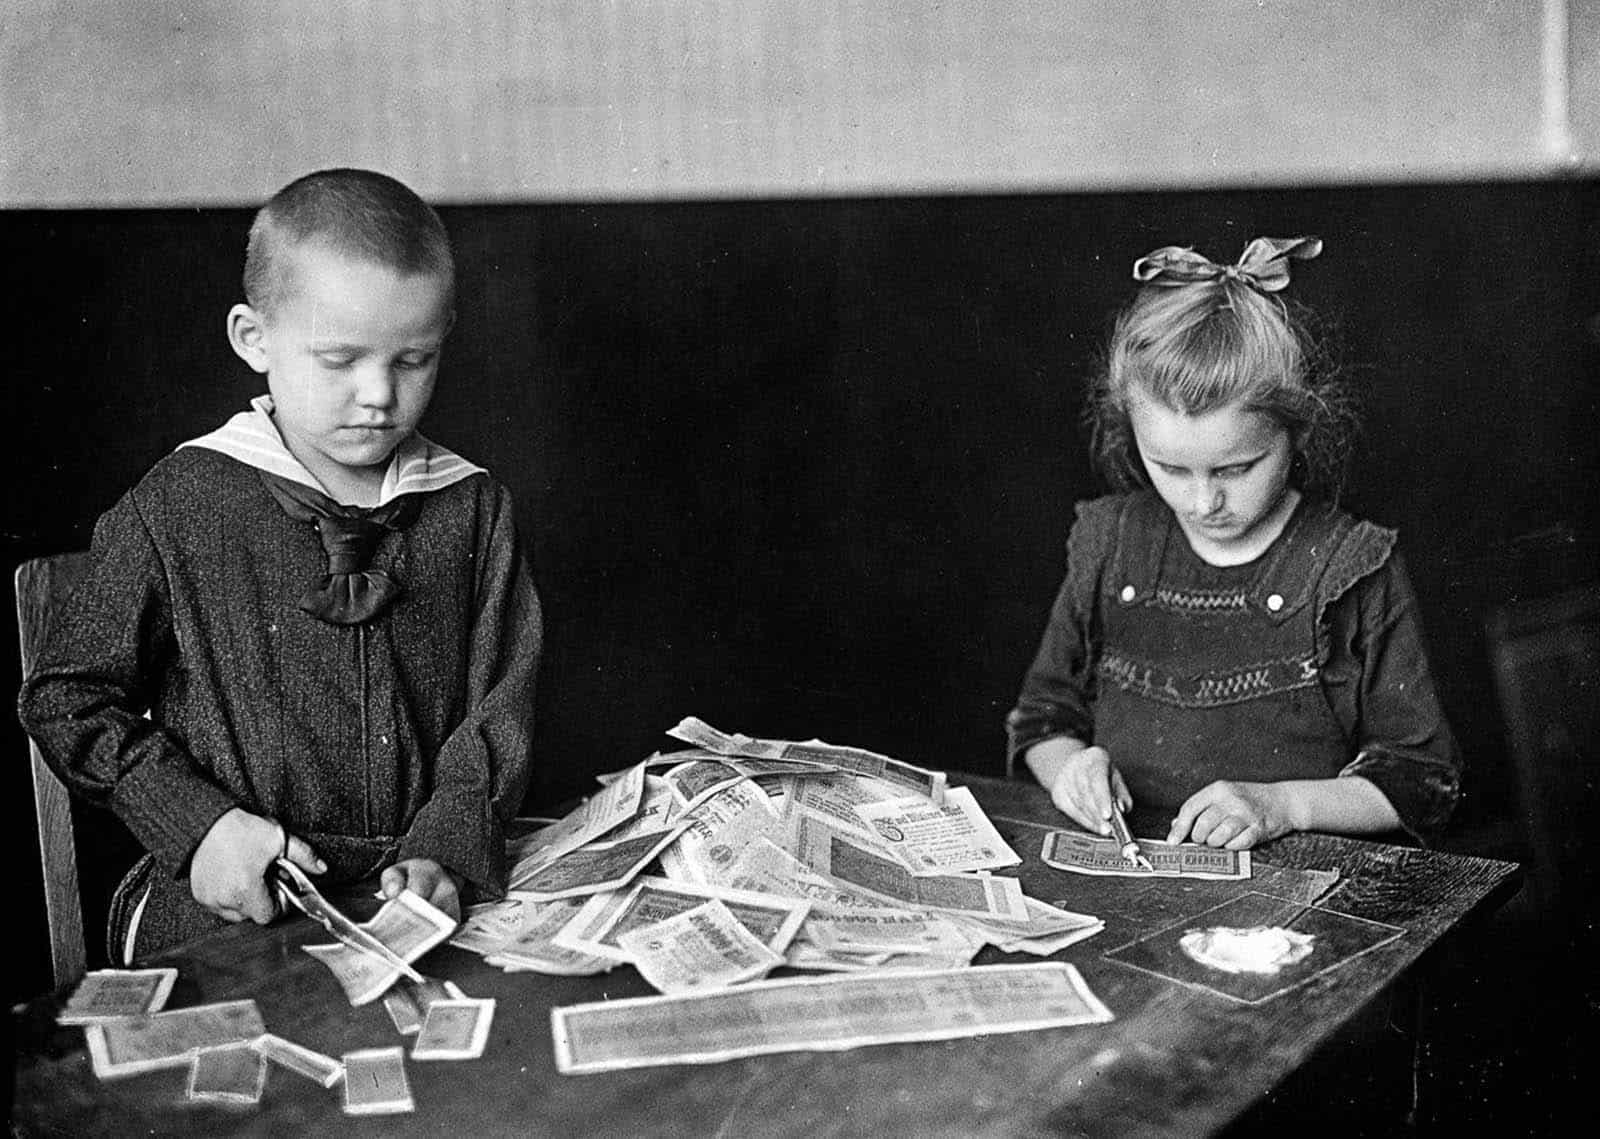 Children play with money notes that have lost value under a hyperinflated economy, Germany 1923.